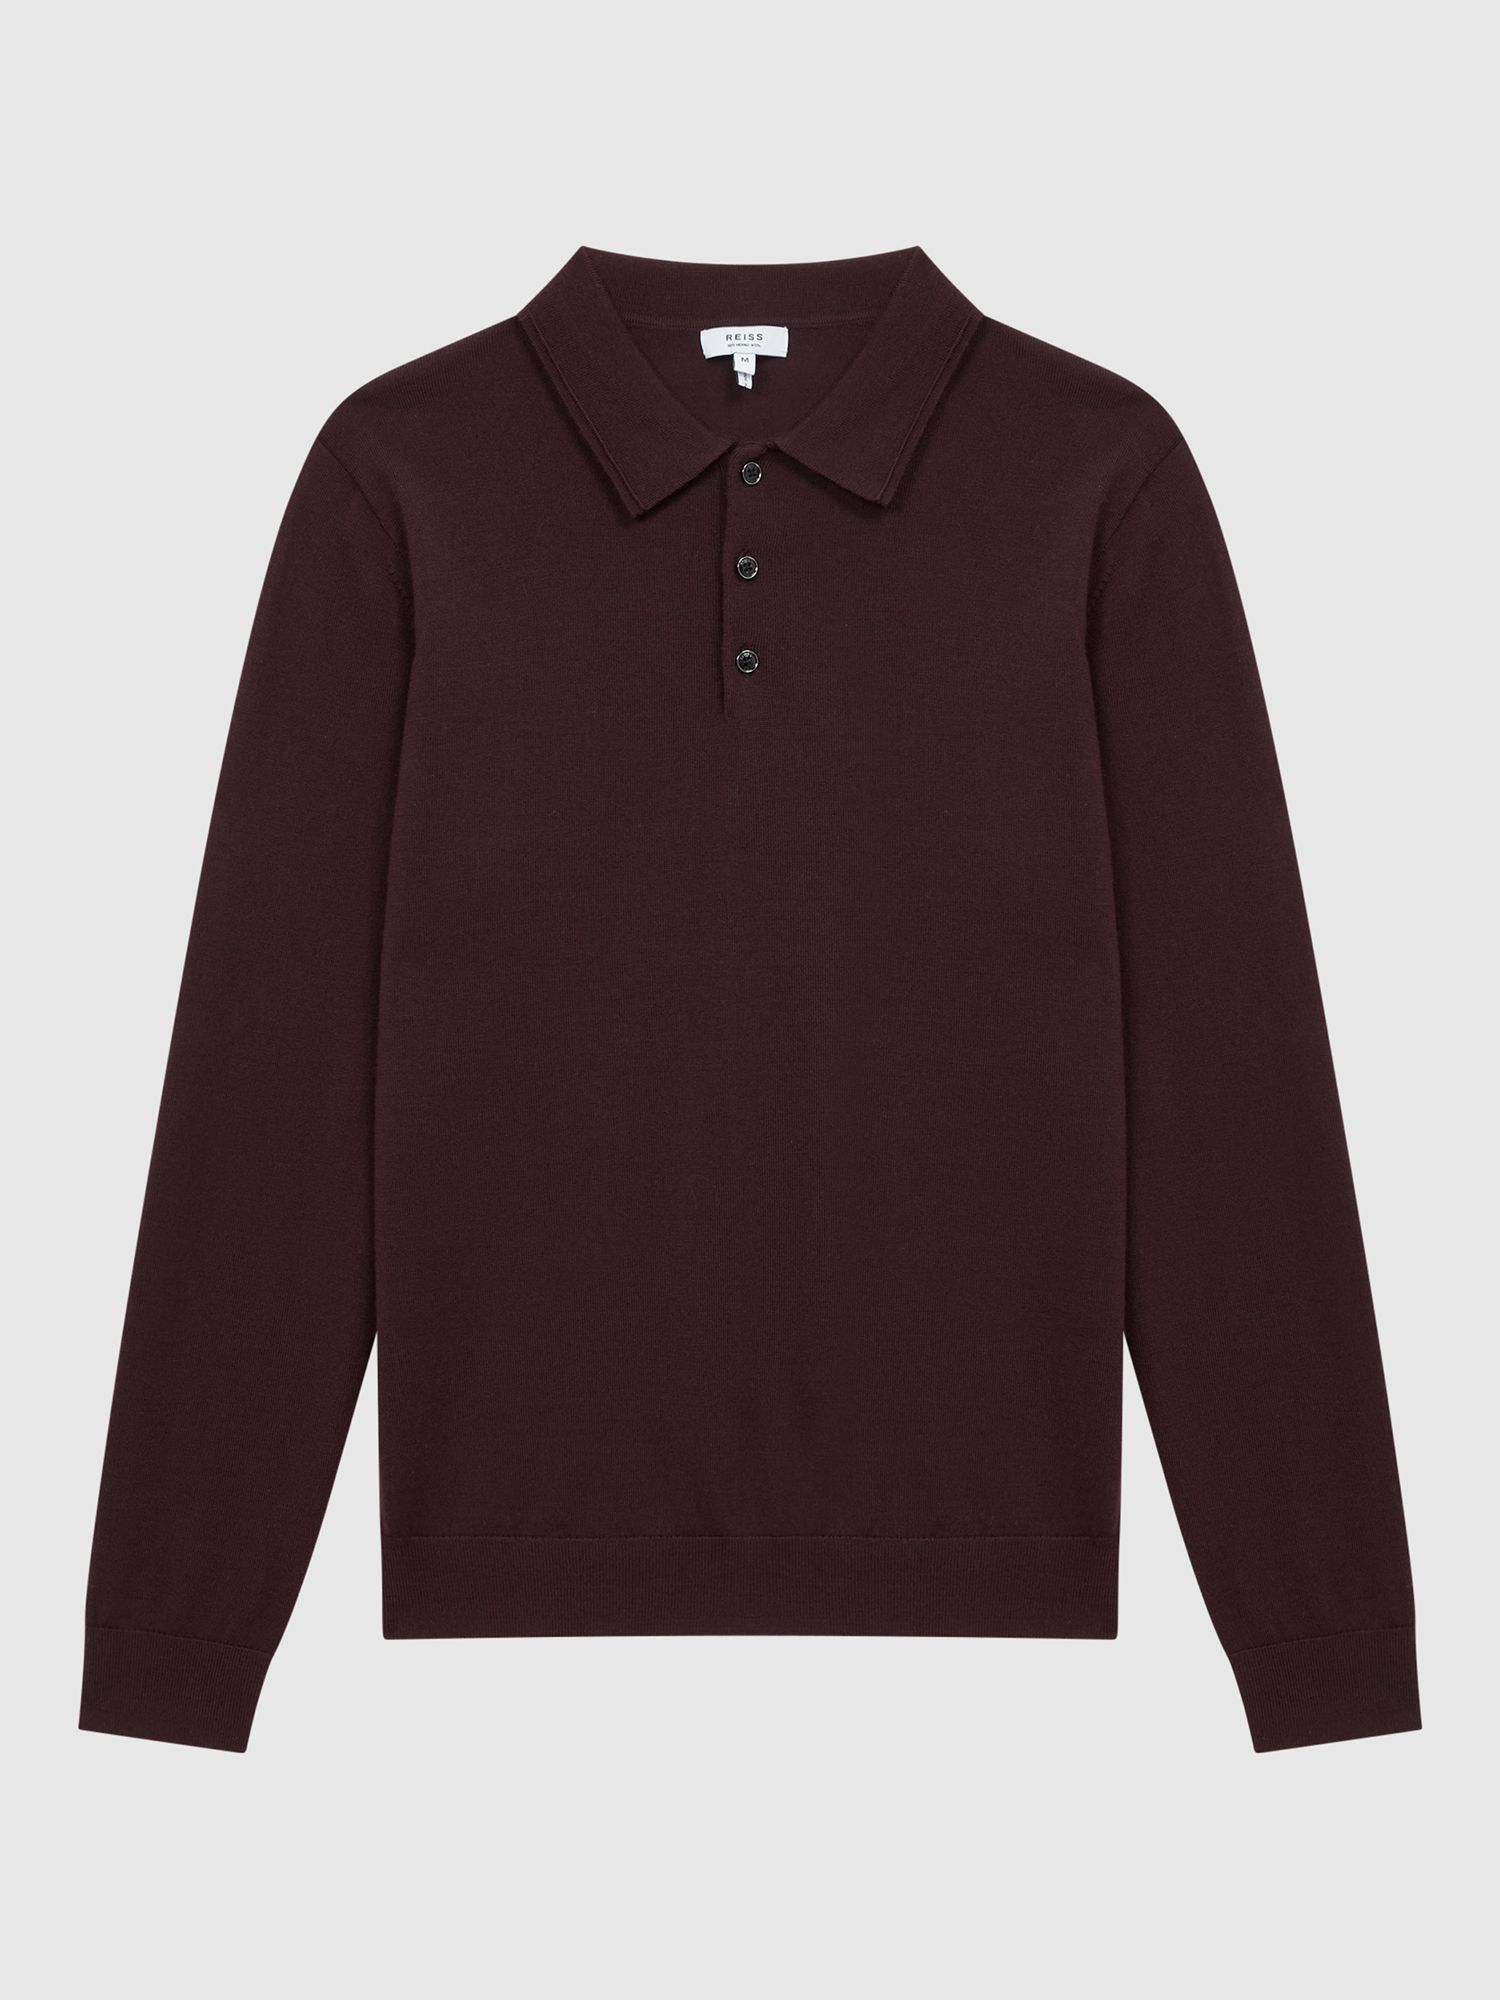 Reiss Trafford Knitted Wool Long Sleeve Polo Top, Bordeaux, XS